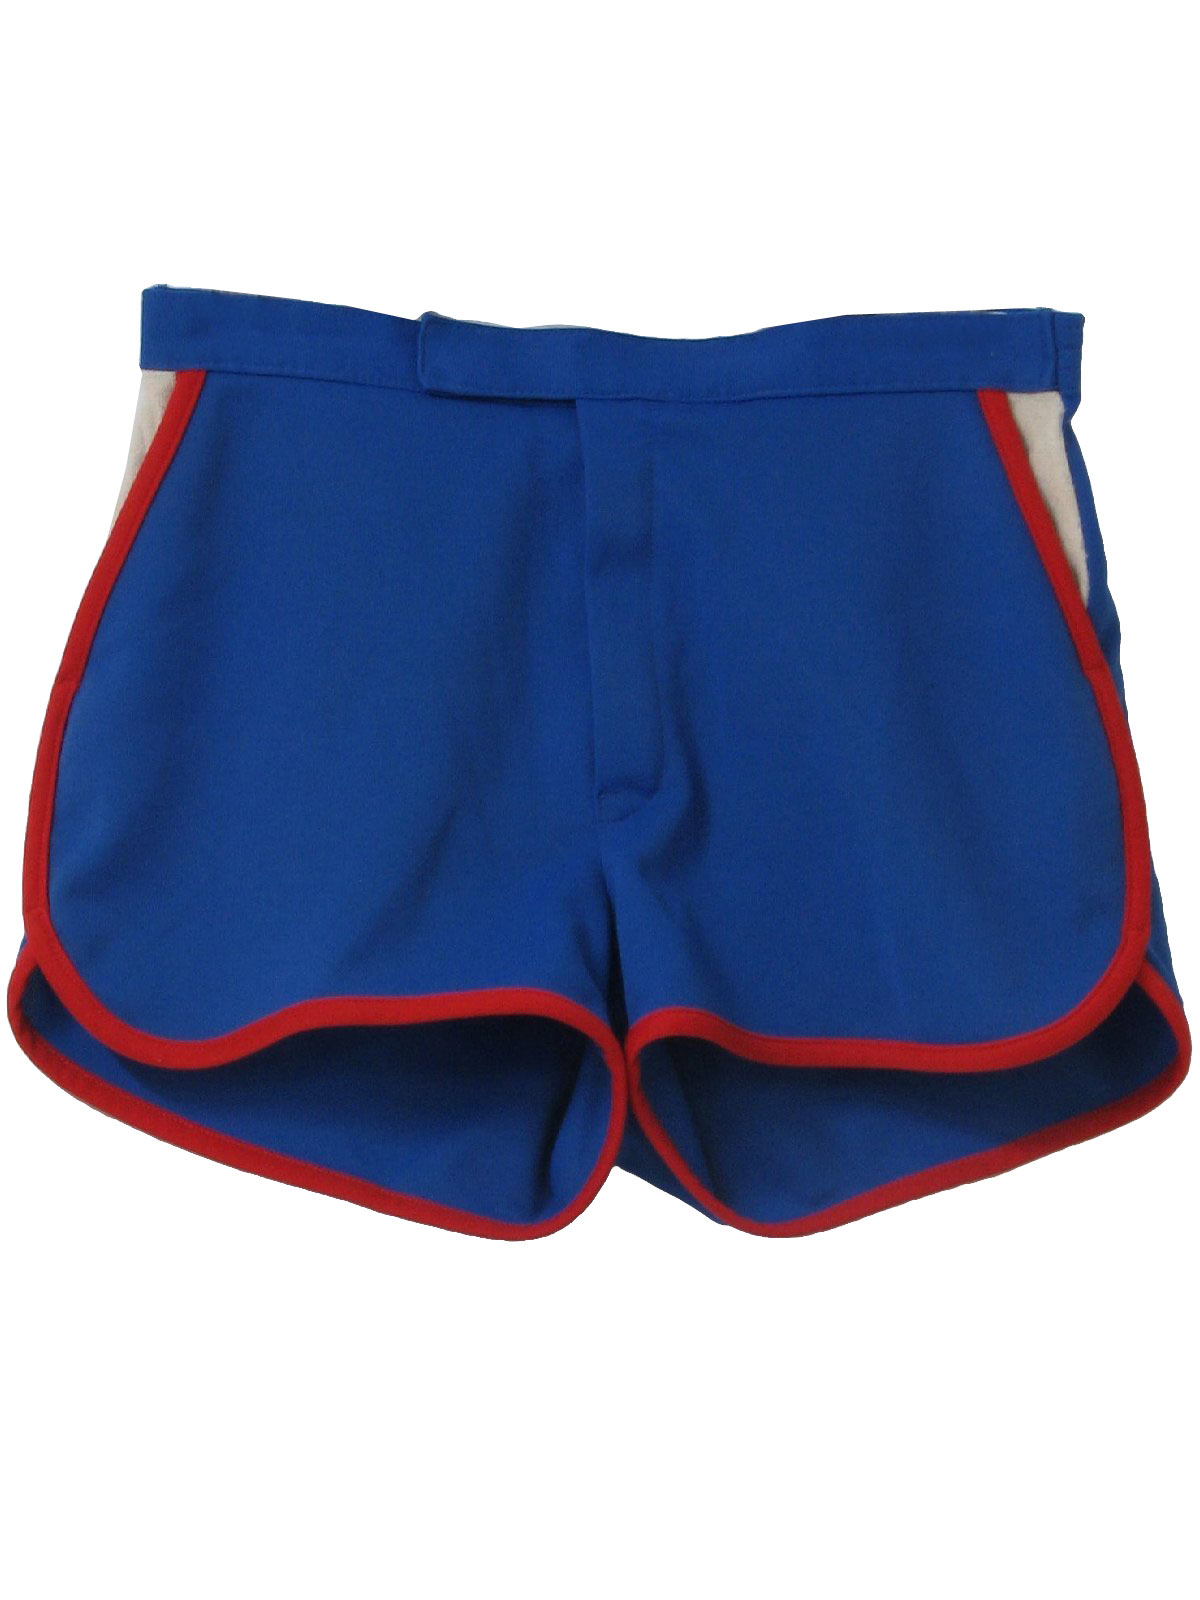 1980's Retro Shorts: Early 80s -Court Casuals- Mens cobalt blue and red ...